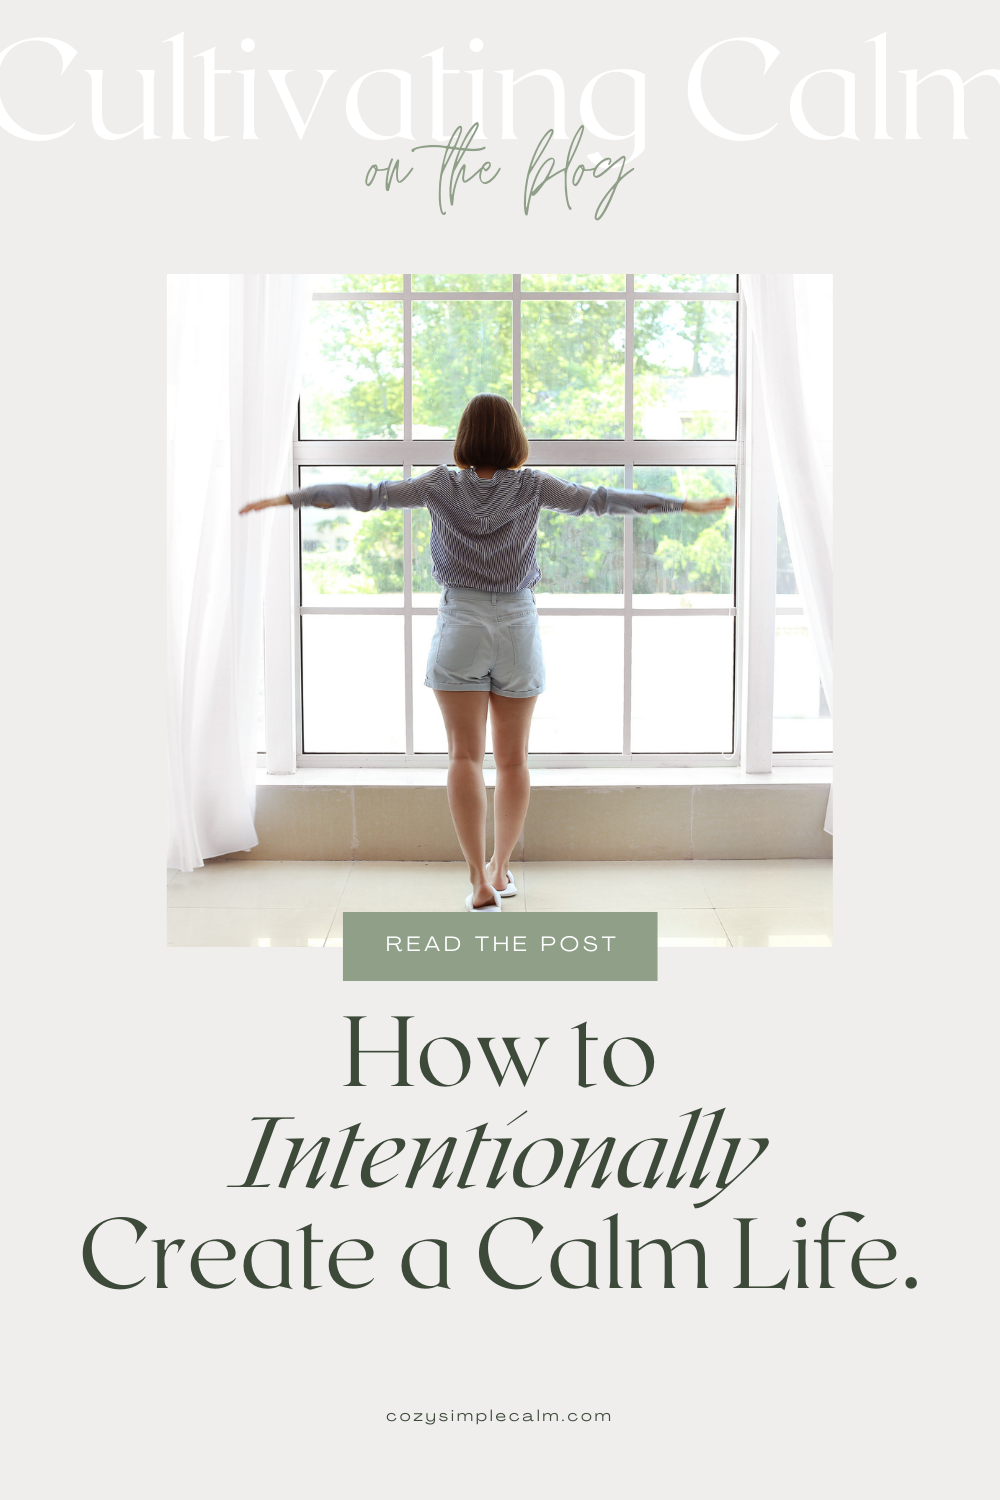 Image of woman standing in front of an open window - Cultivating calm: How to intentionally create a calmer life - cozysimplecalm.com